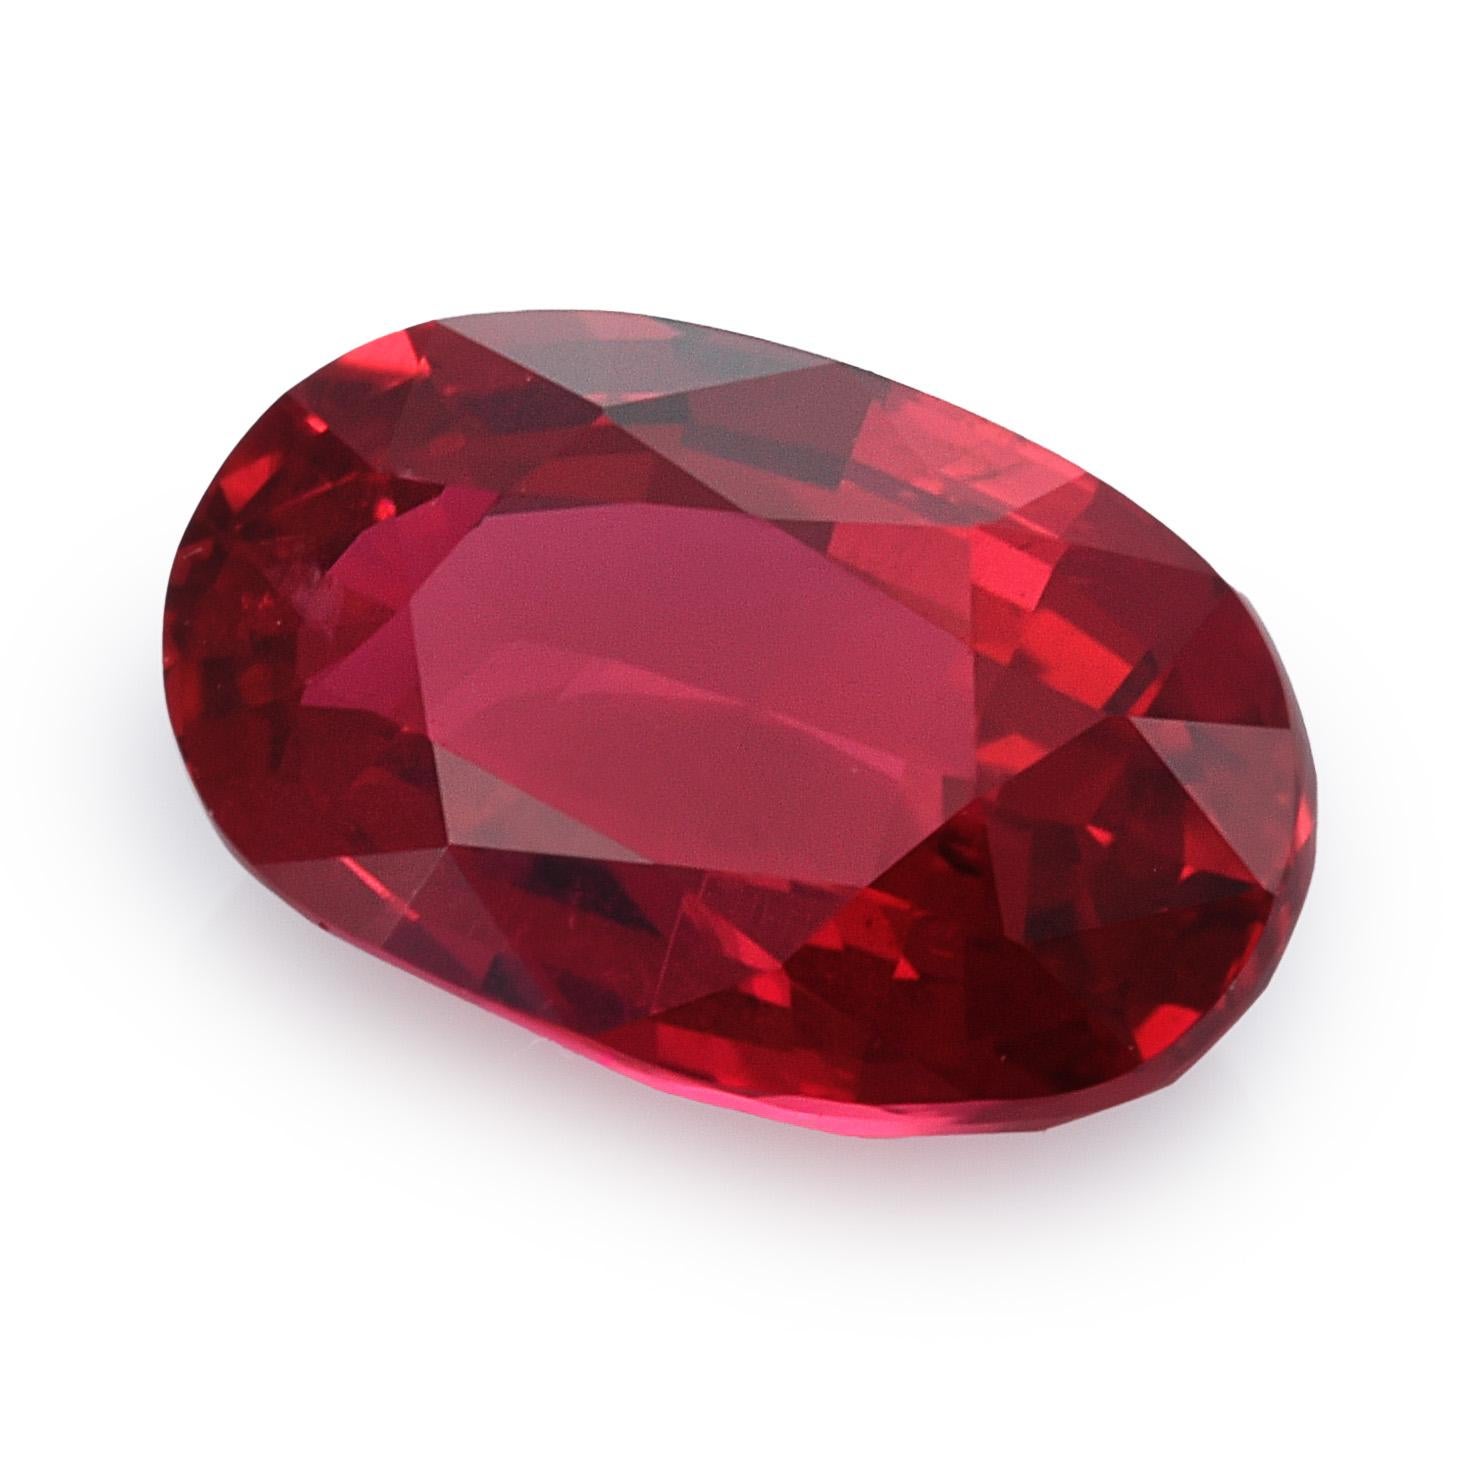 Mixed Cut GIA Certified 1.09 Carats Unheated Mozambique Ruby For Sale